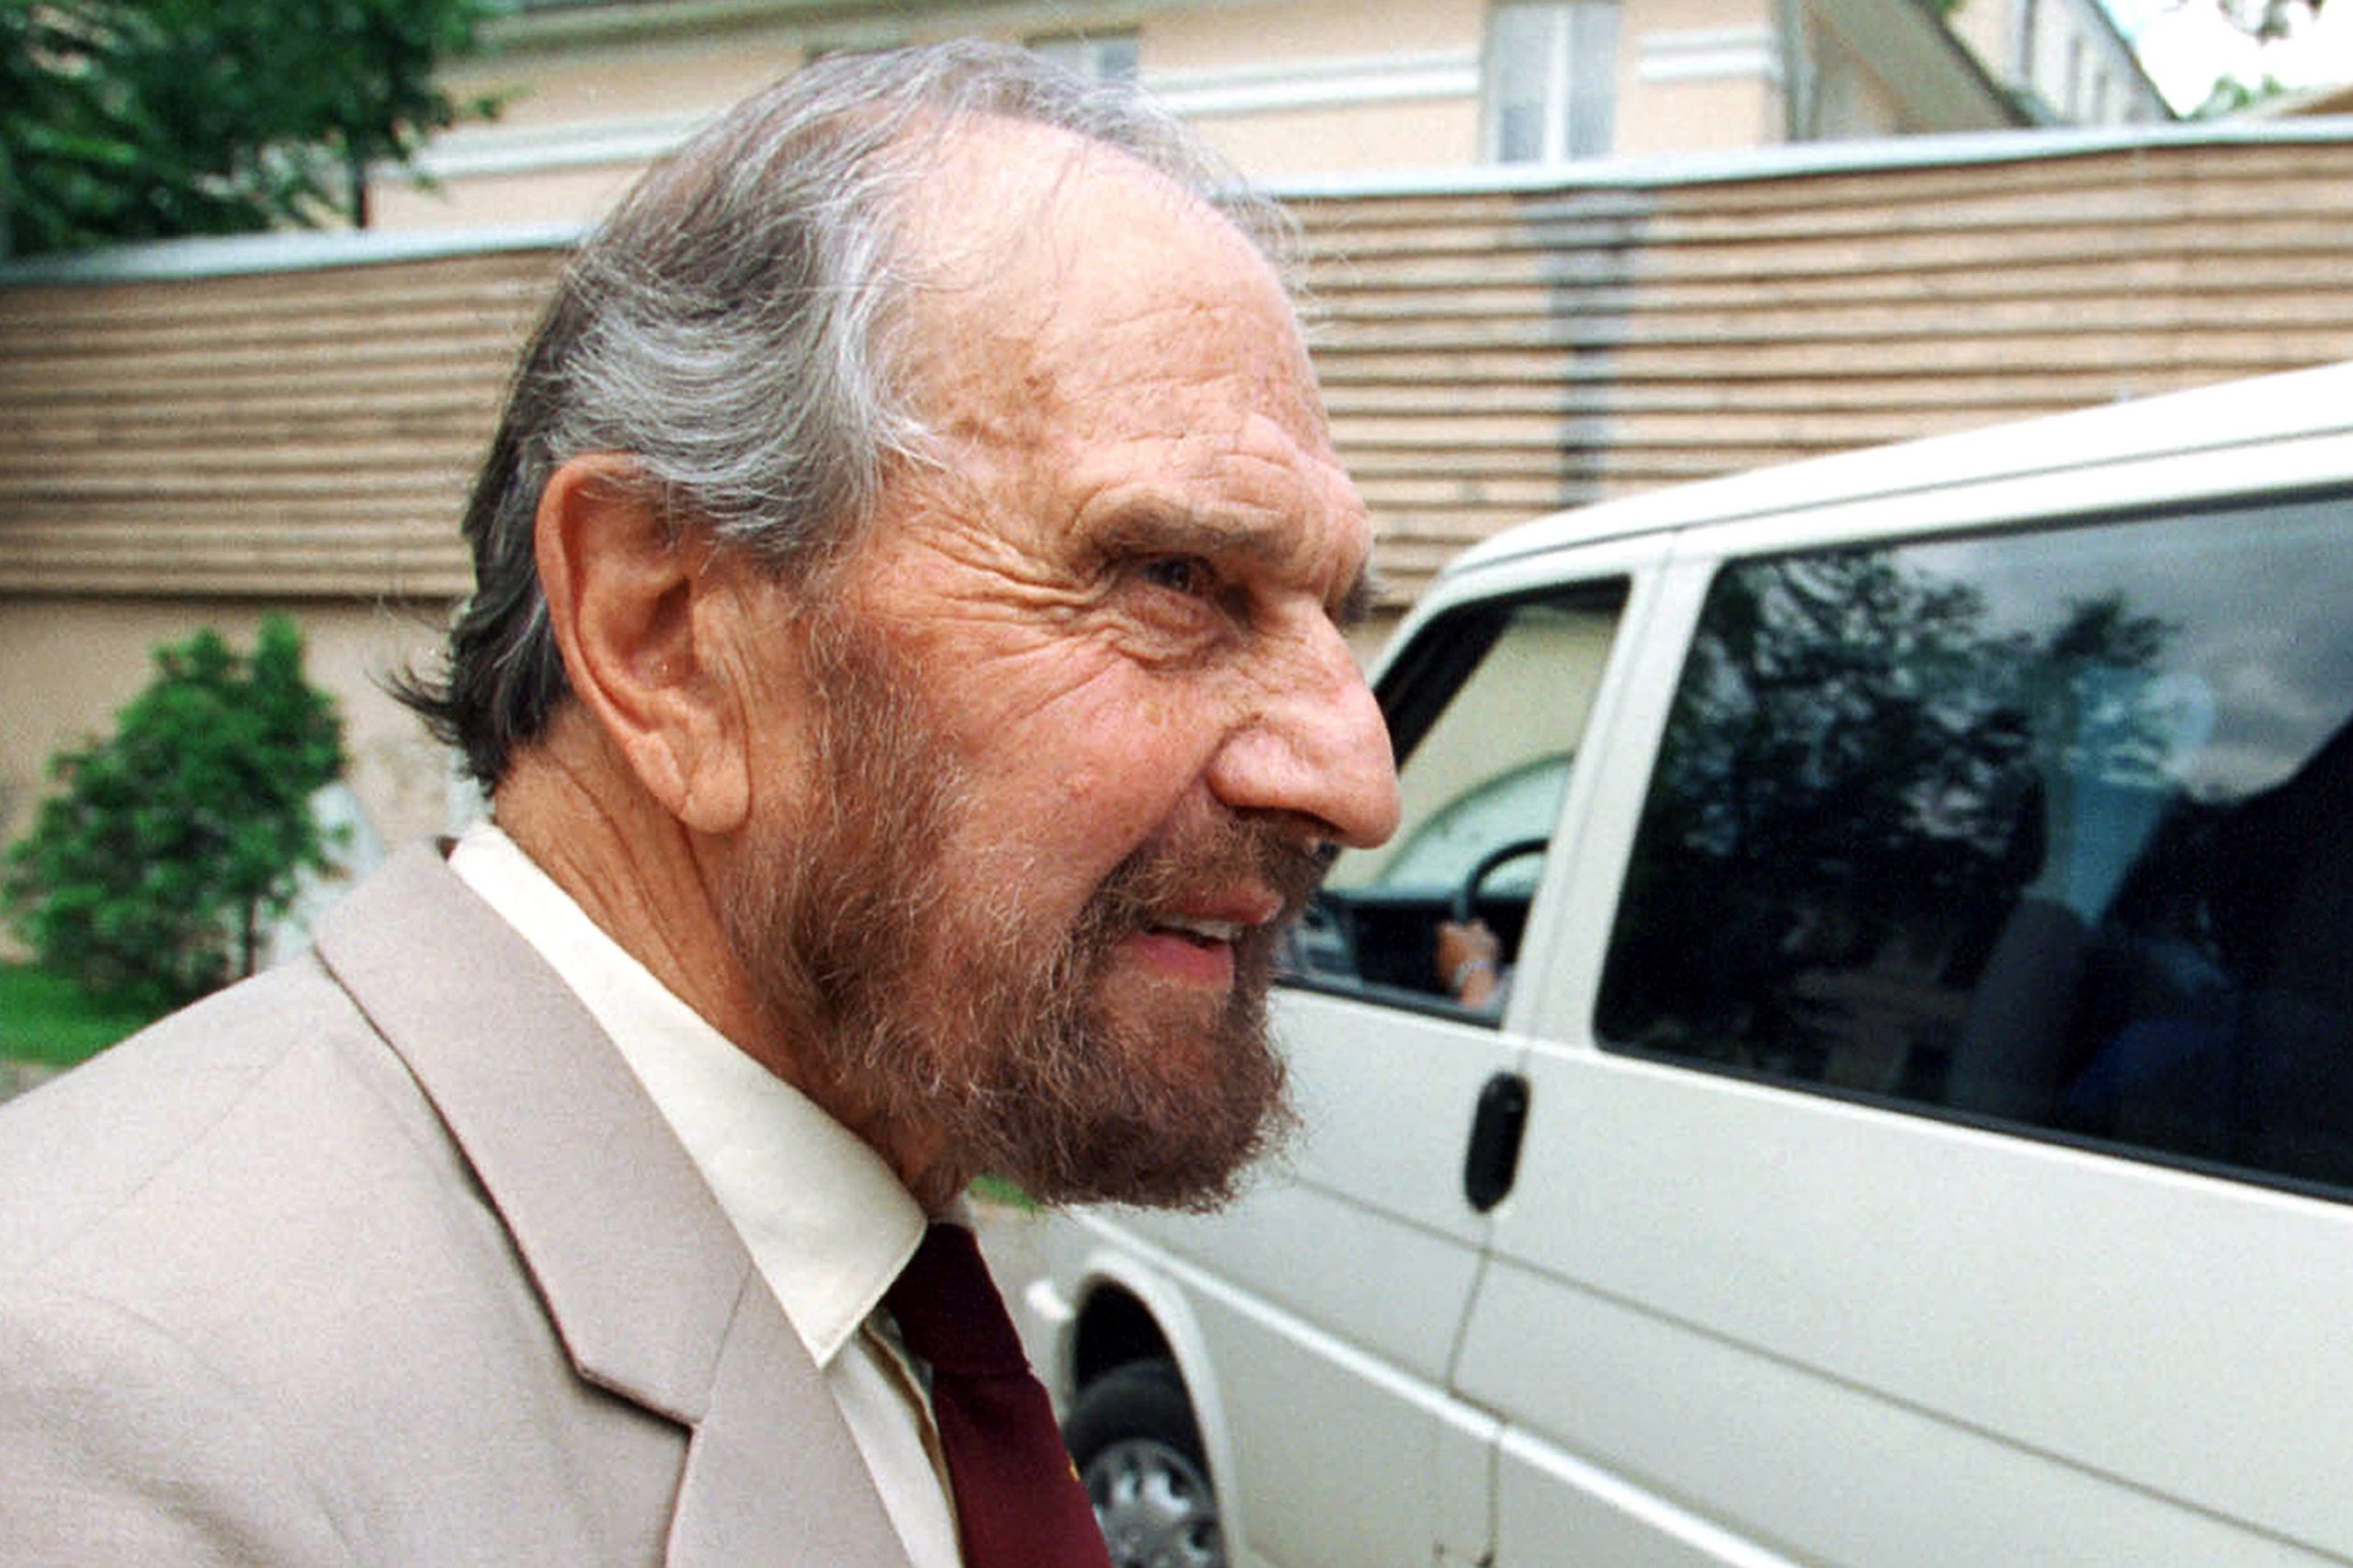 George Blake, British intelligence agent who spied for USSR during Cold War, dies in Moscow